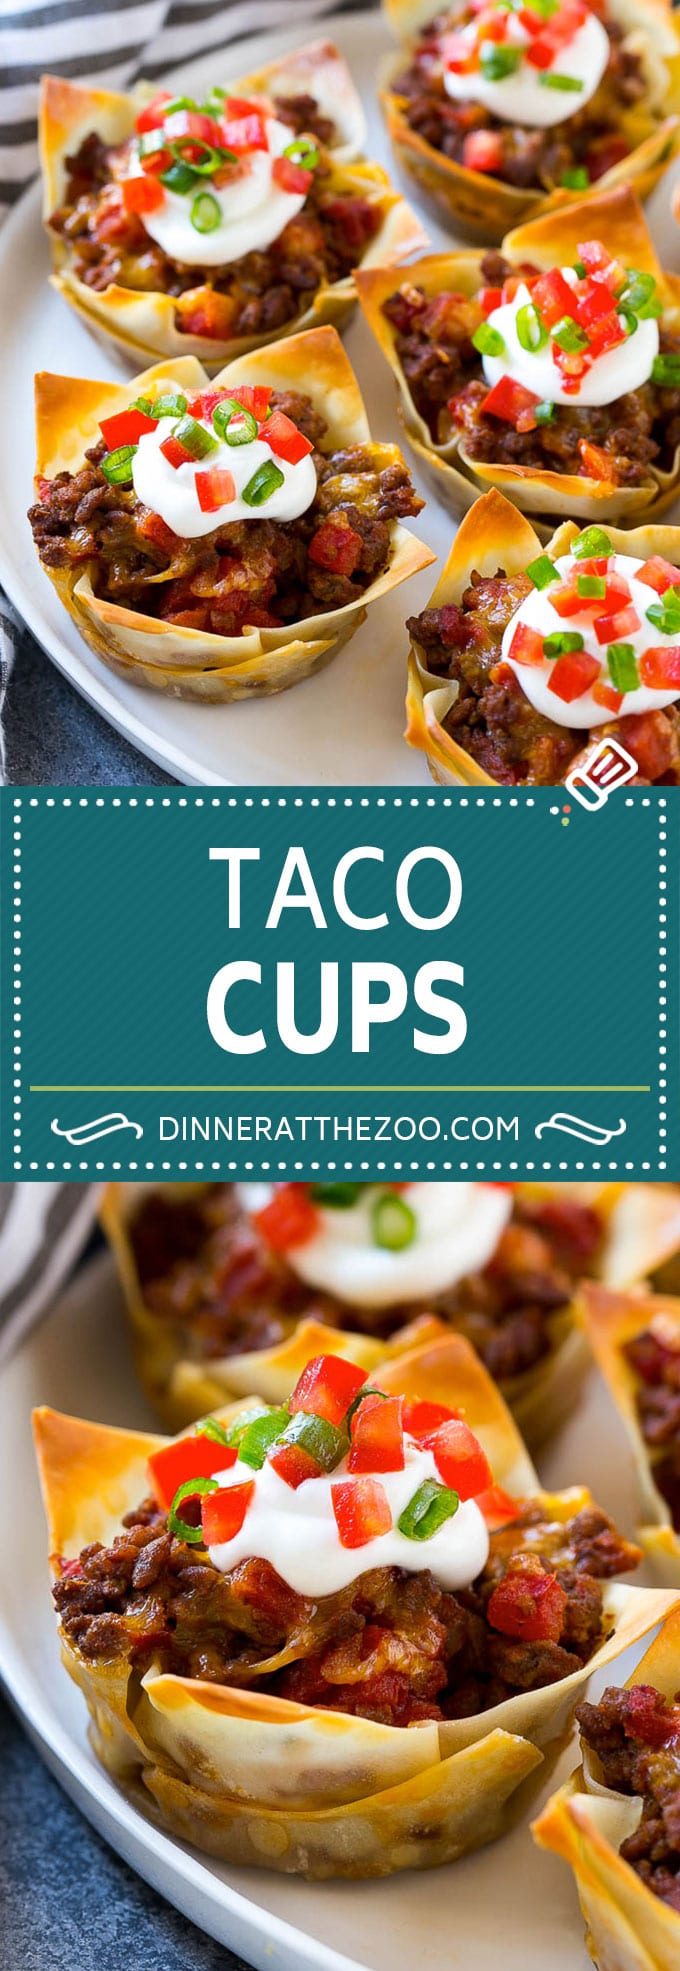 Taco Cups Recipe | Wonton Taco Cups | Taco Cupcakes | Mexican Appetizer #taco #hamburger #appetizer #dinneratthezoo #beef